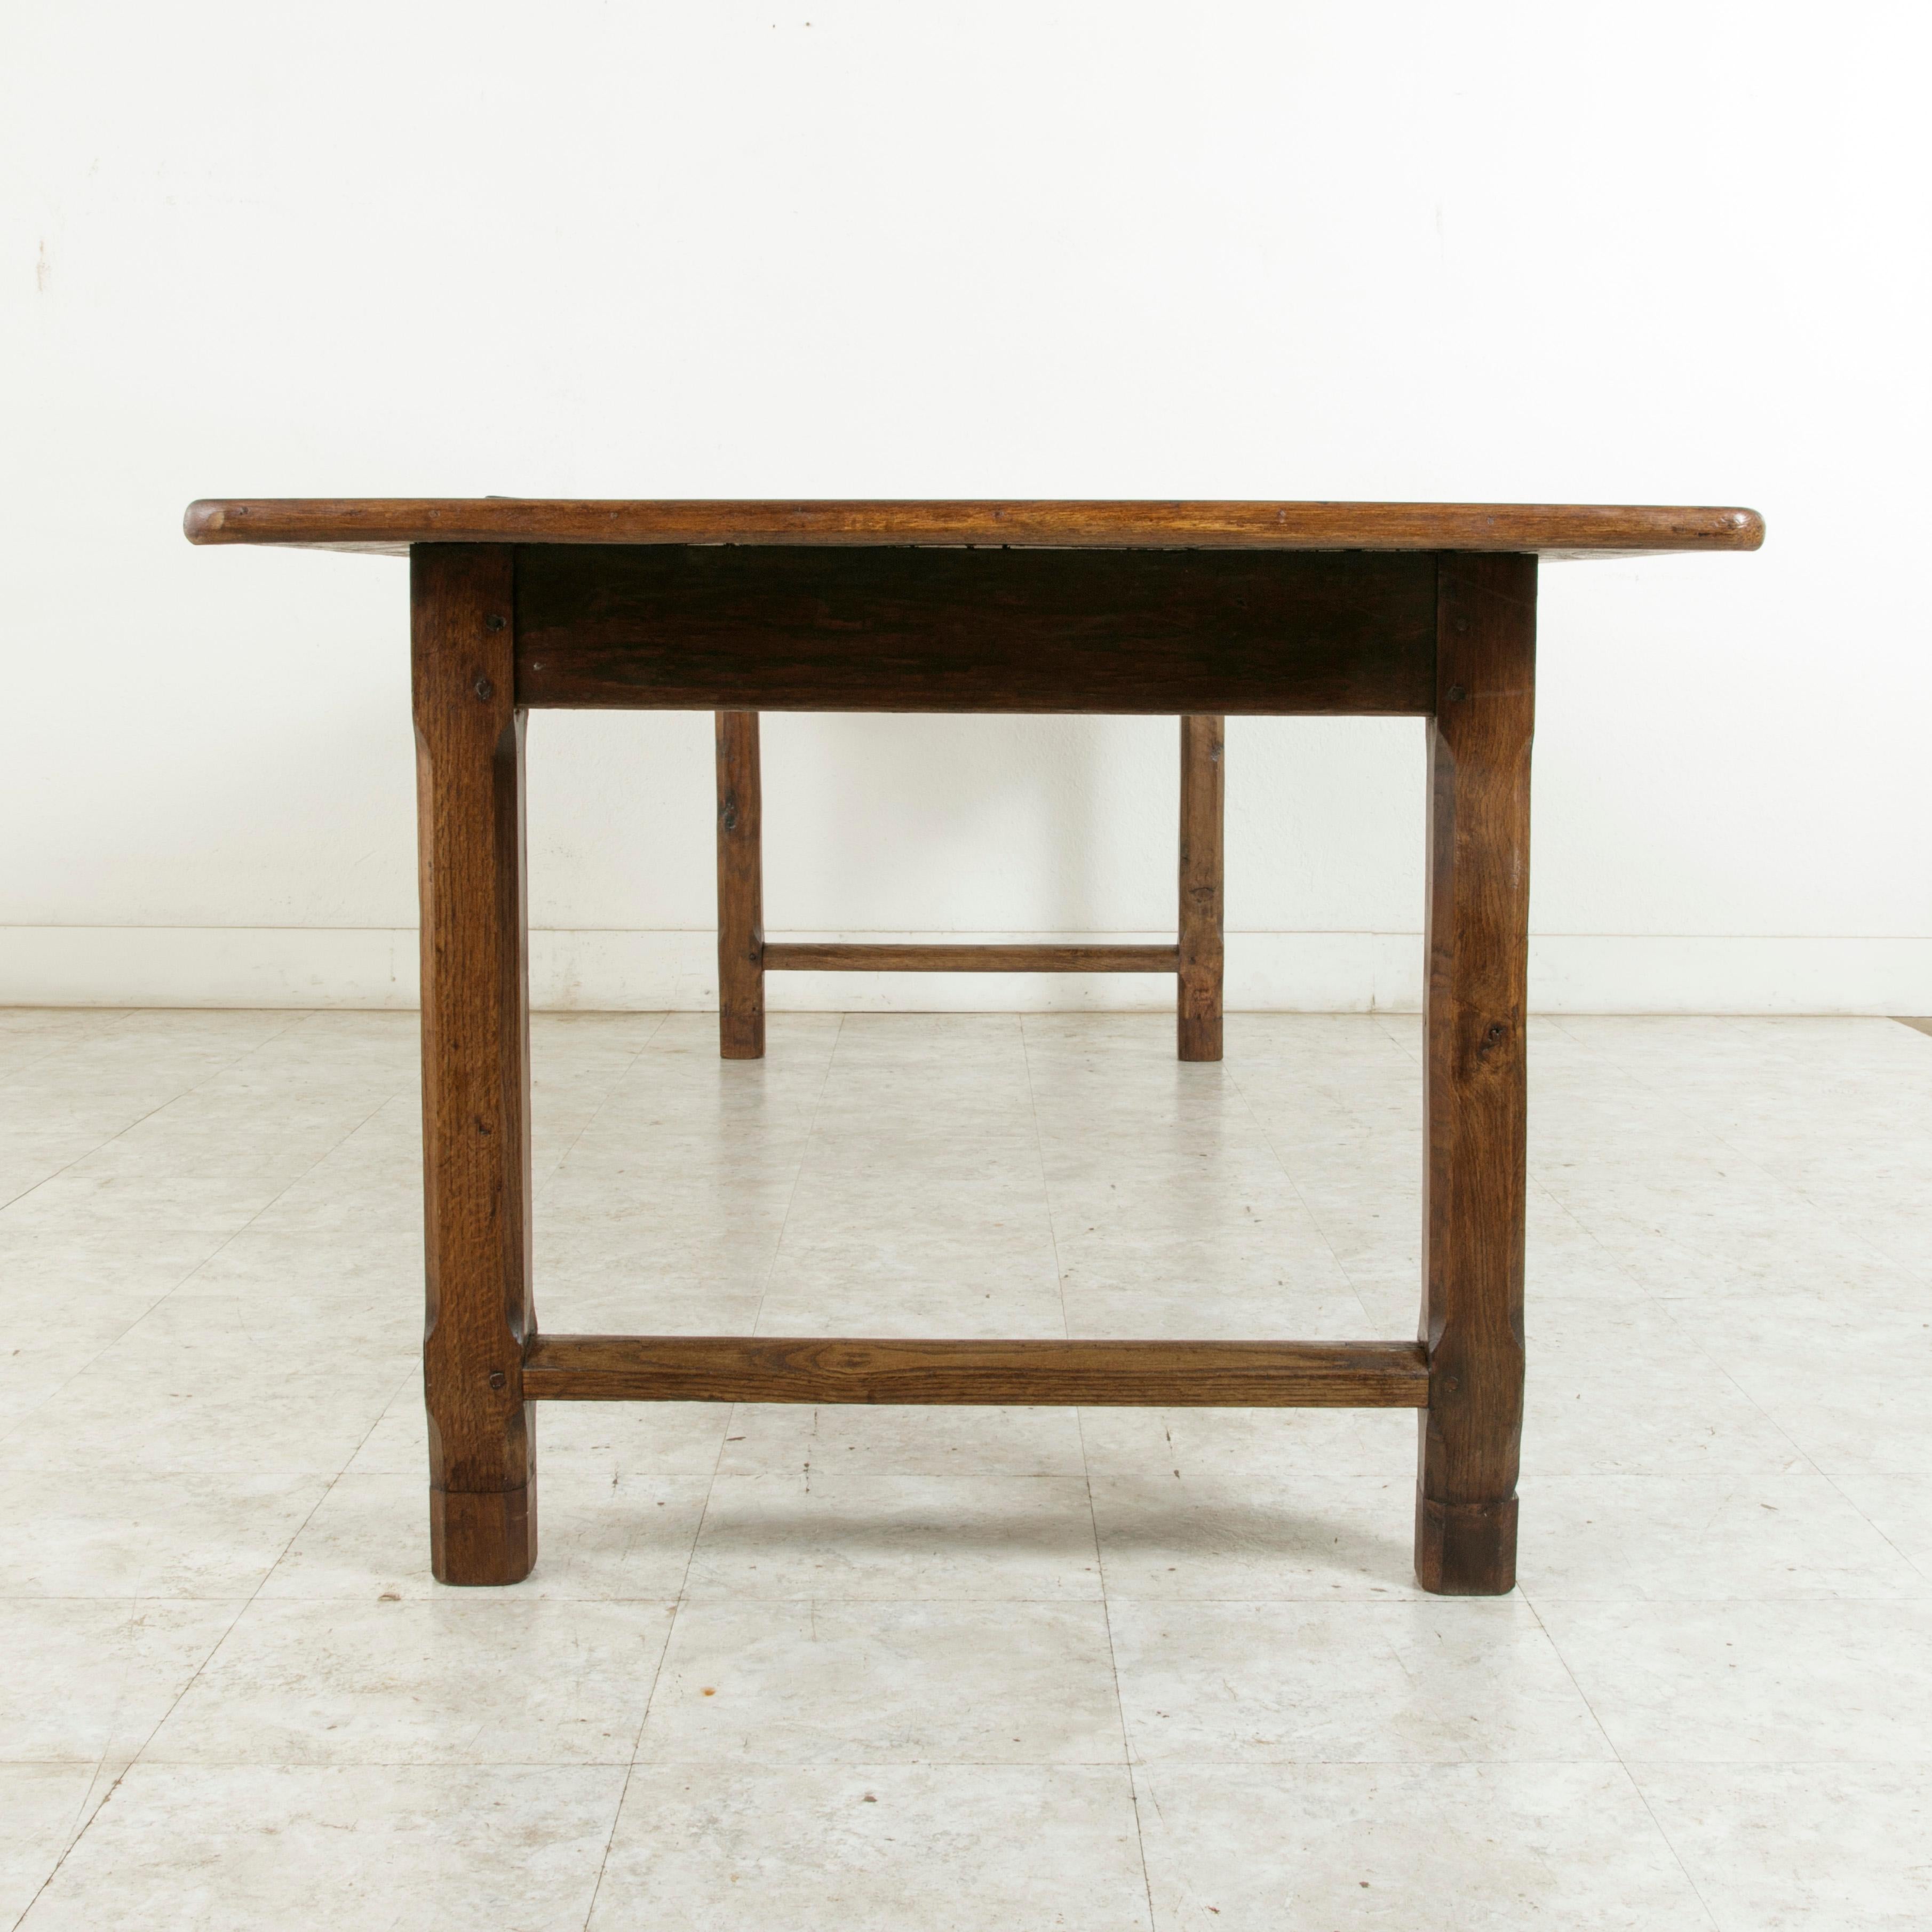 Early 20th Century Ten Foot Long French Artisan Made Oak Farm Table or Dining Table, circa 1900